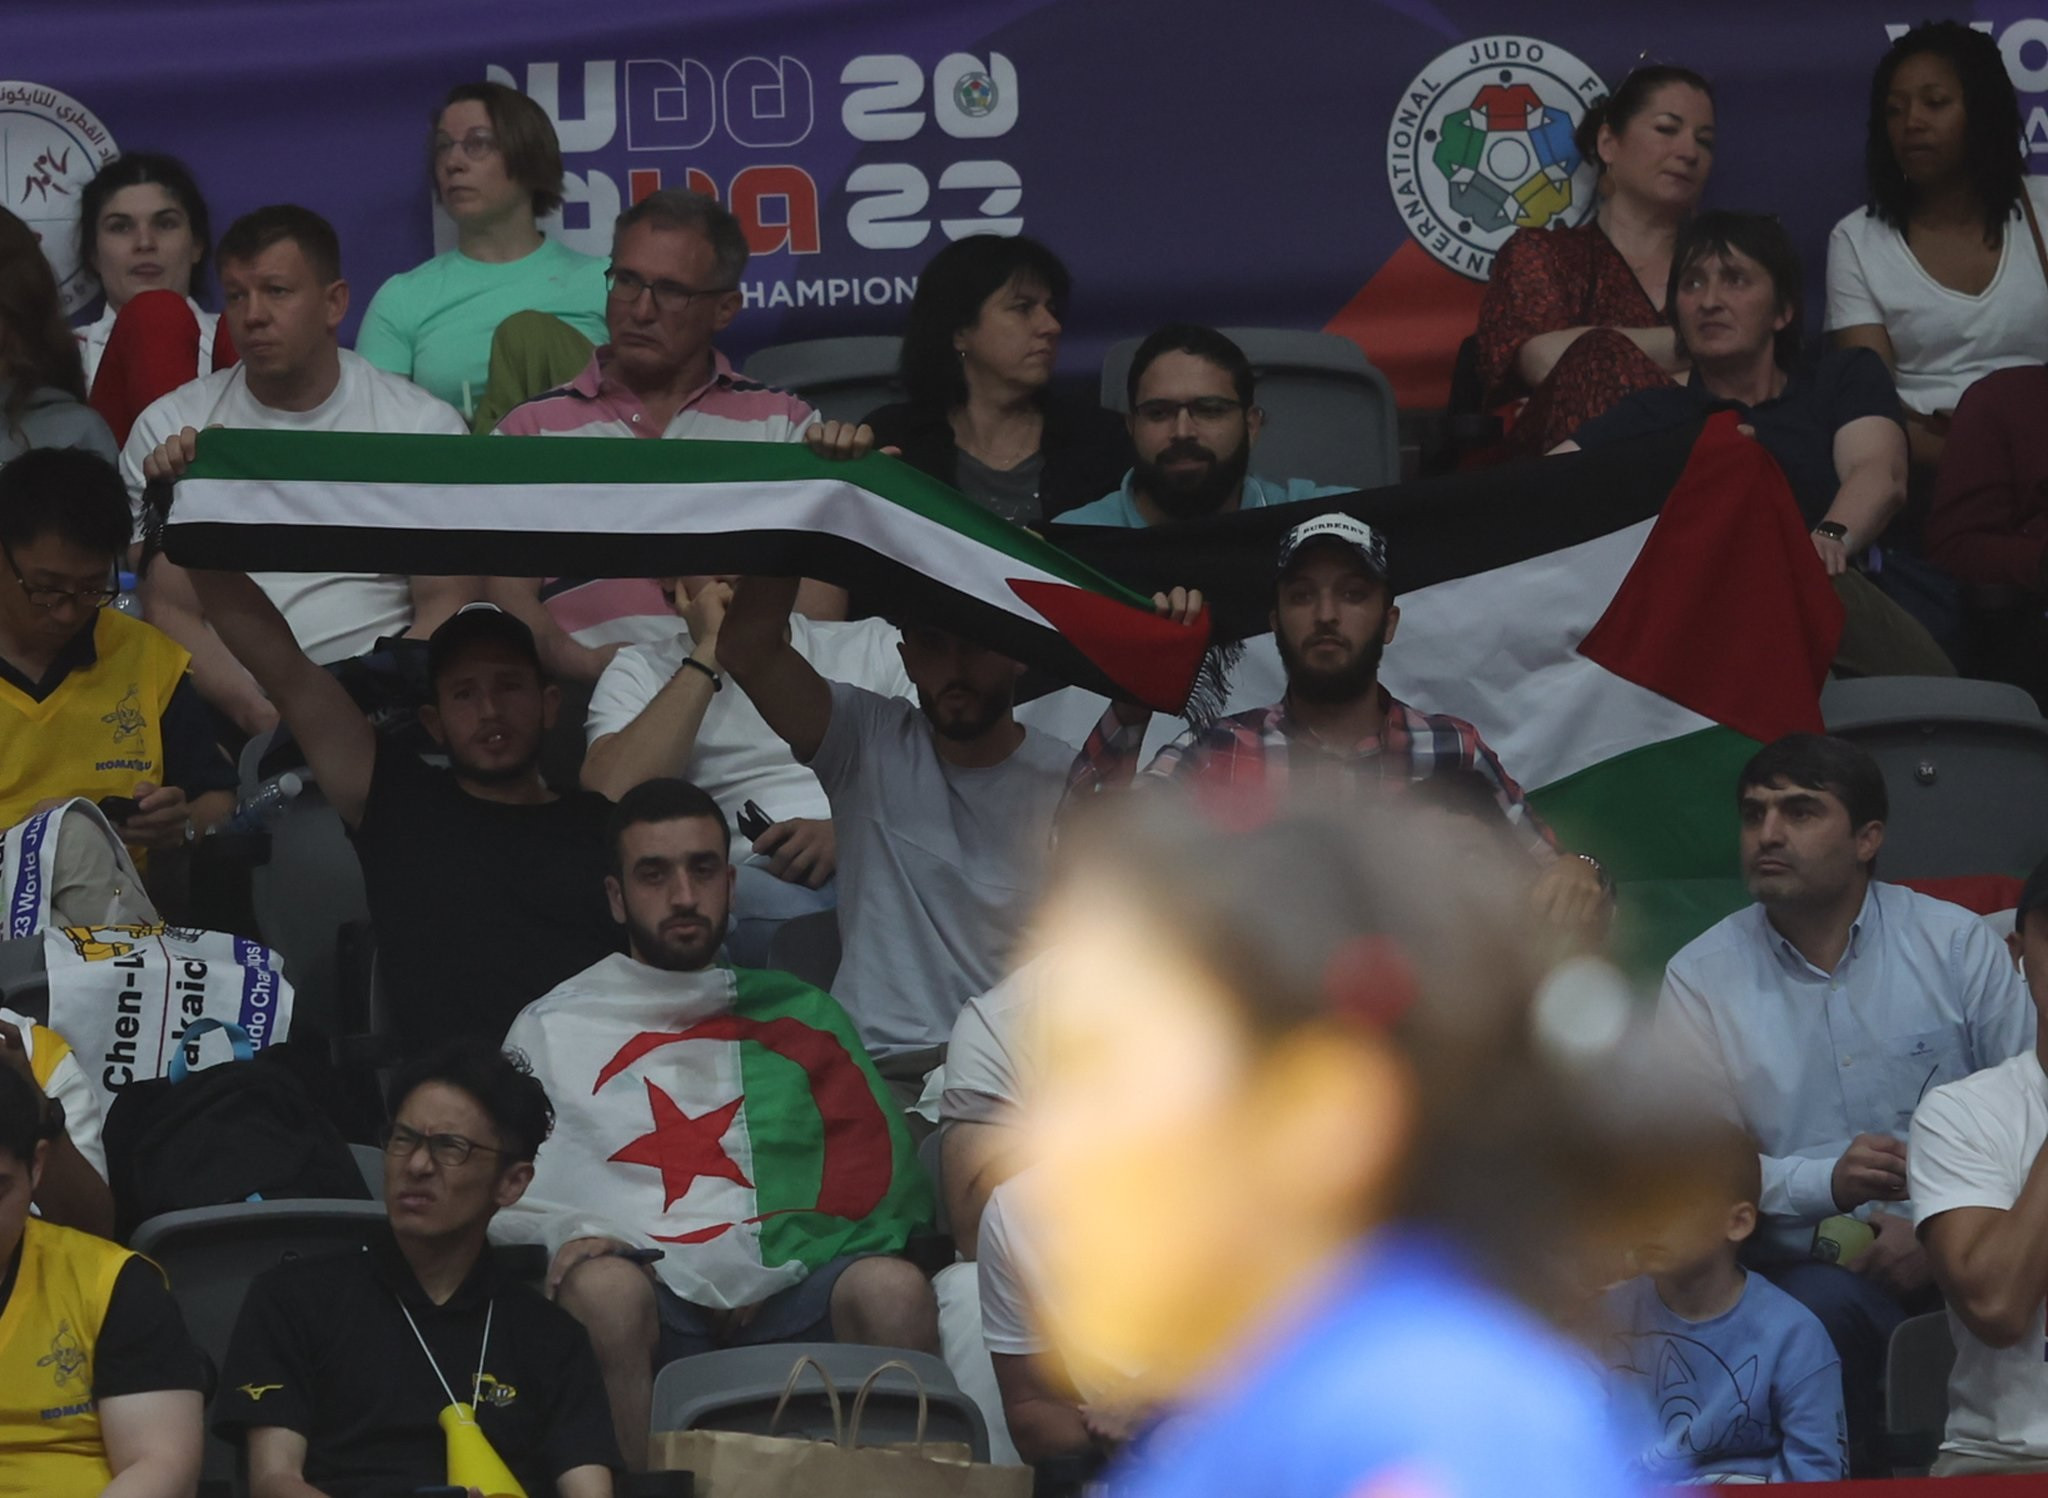 A political protest was held at the recent World Judo Championships when fans chanted 